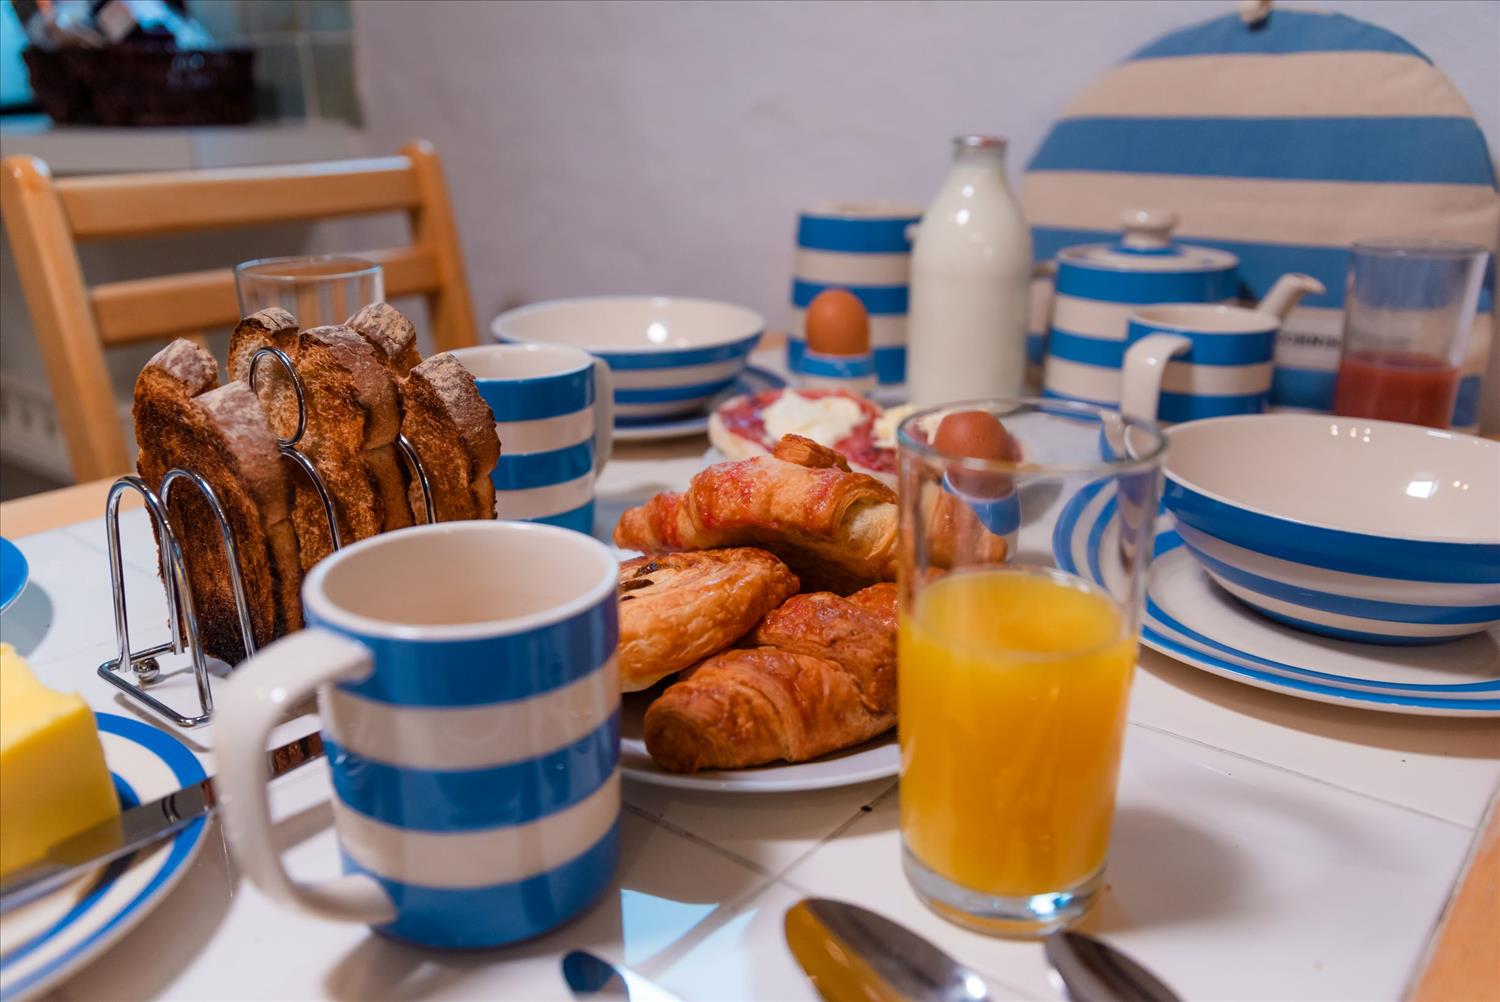 Close-up of a breakfast table at Polrunny Farm's Blackberry Cottage, with vintage blue and white Cornishware crockery, pastries, toast and juices.